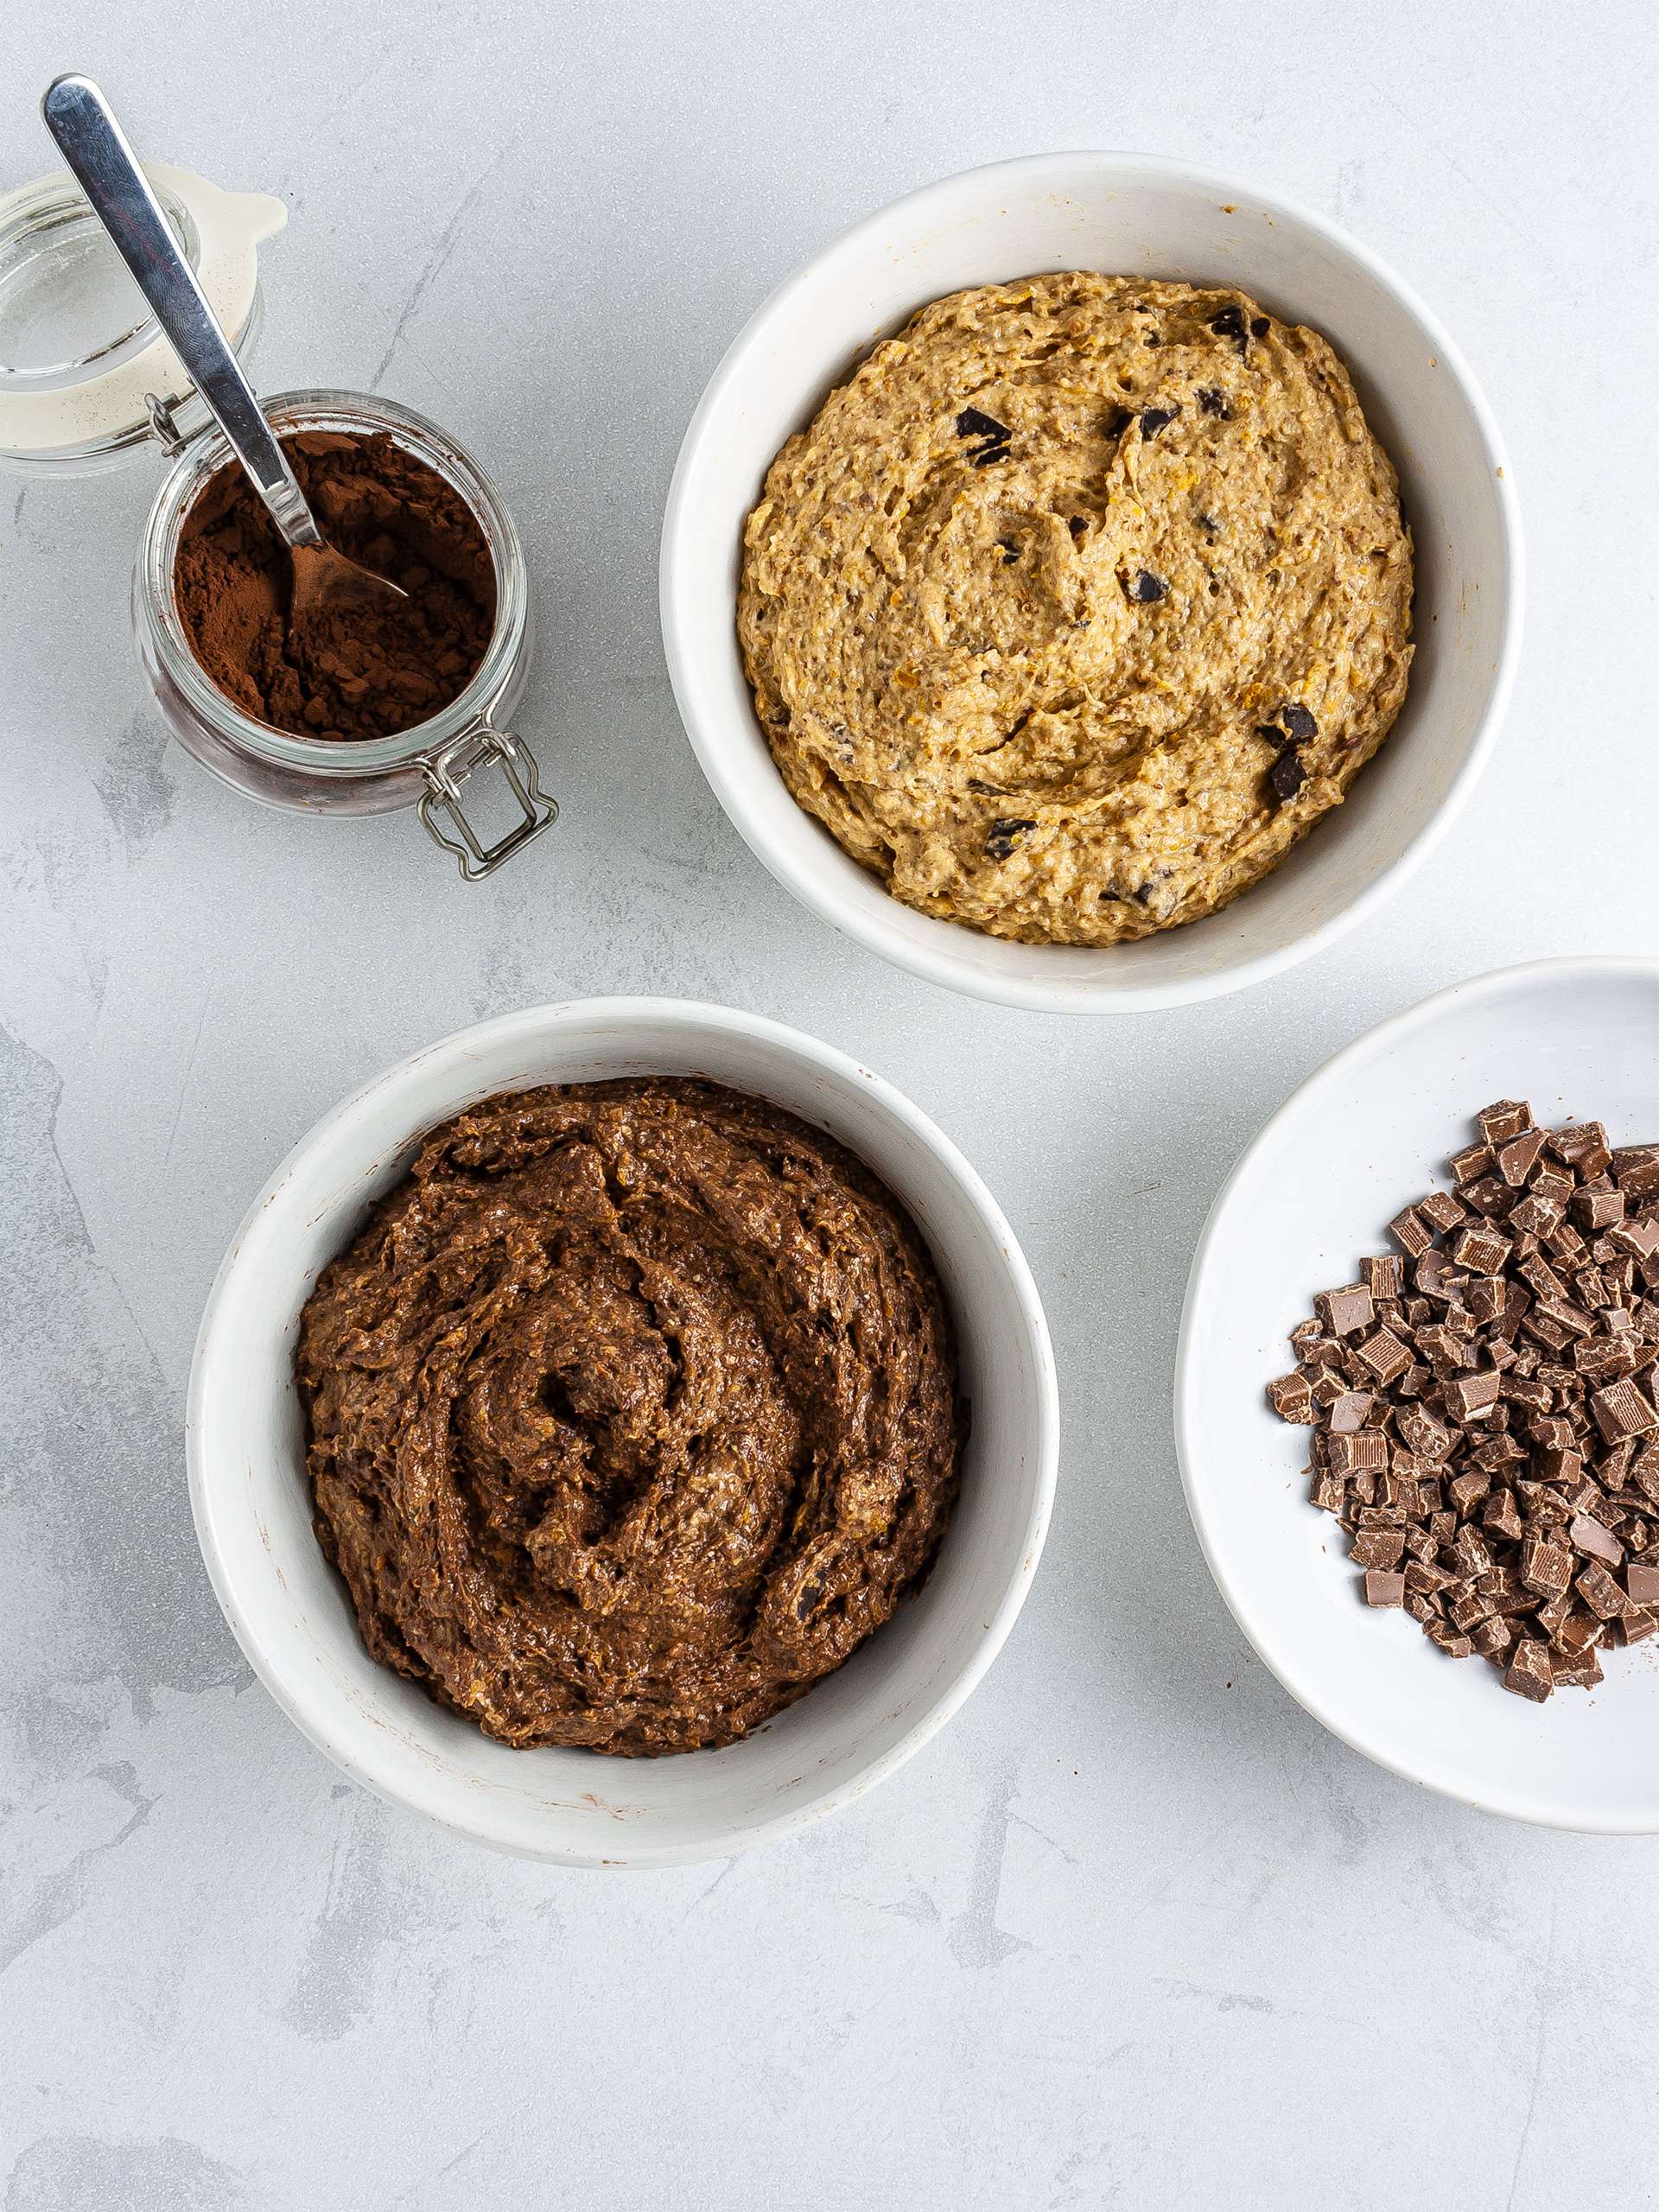 Pumpkin bread batter with cacao and chocolate chips